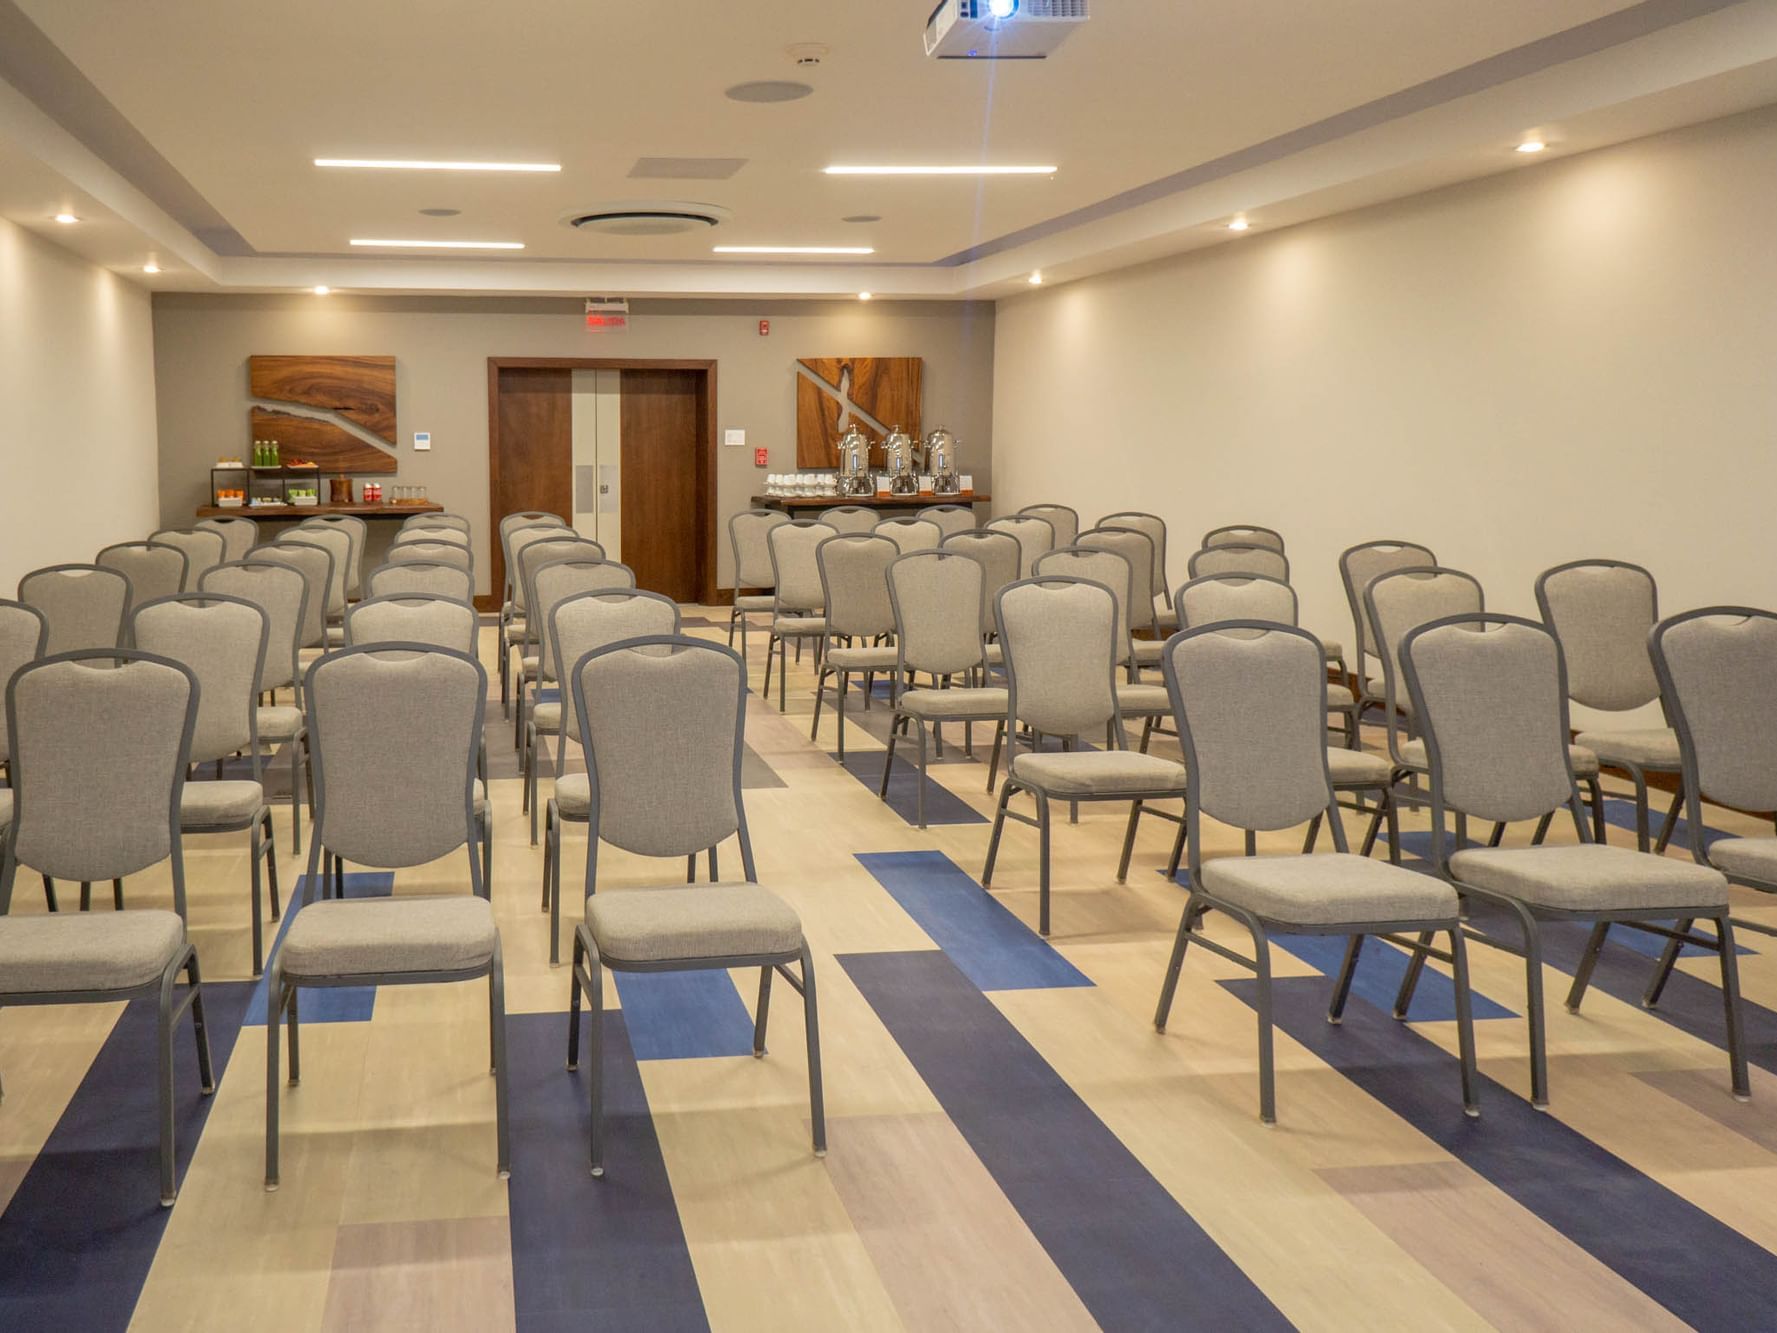 Coral Meeting room arranged with ash chairs at Fiesta resort 